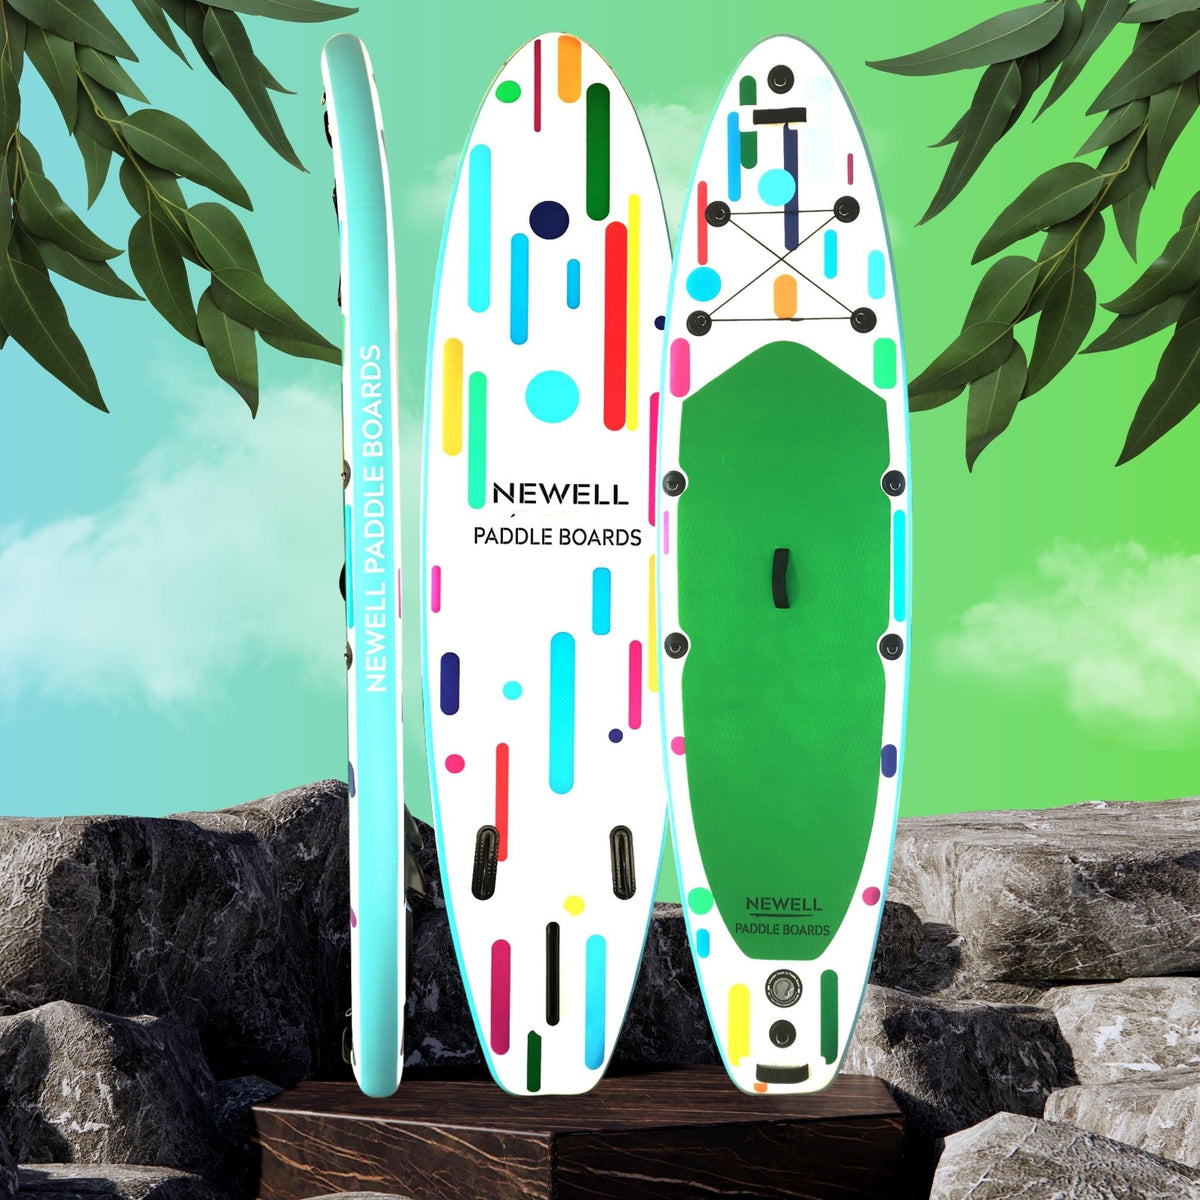 The 4 OH 3 paddleboard against a colorful background.